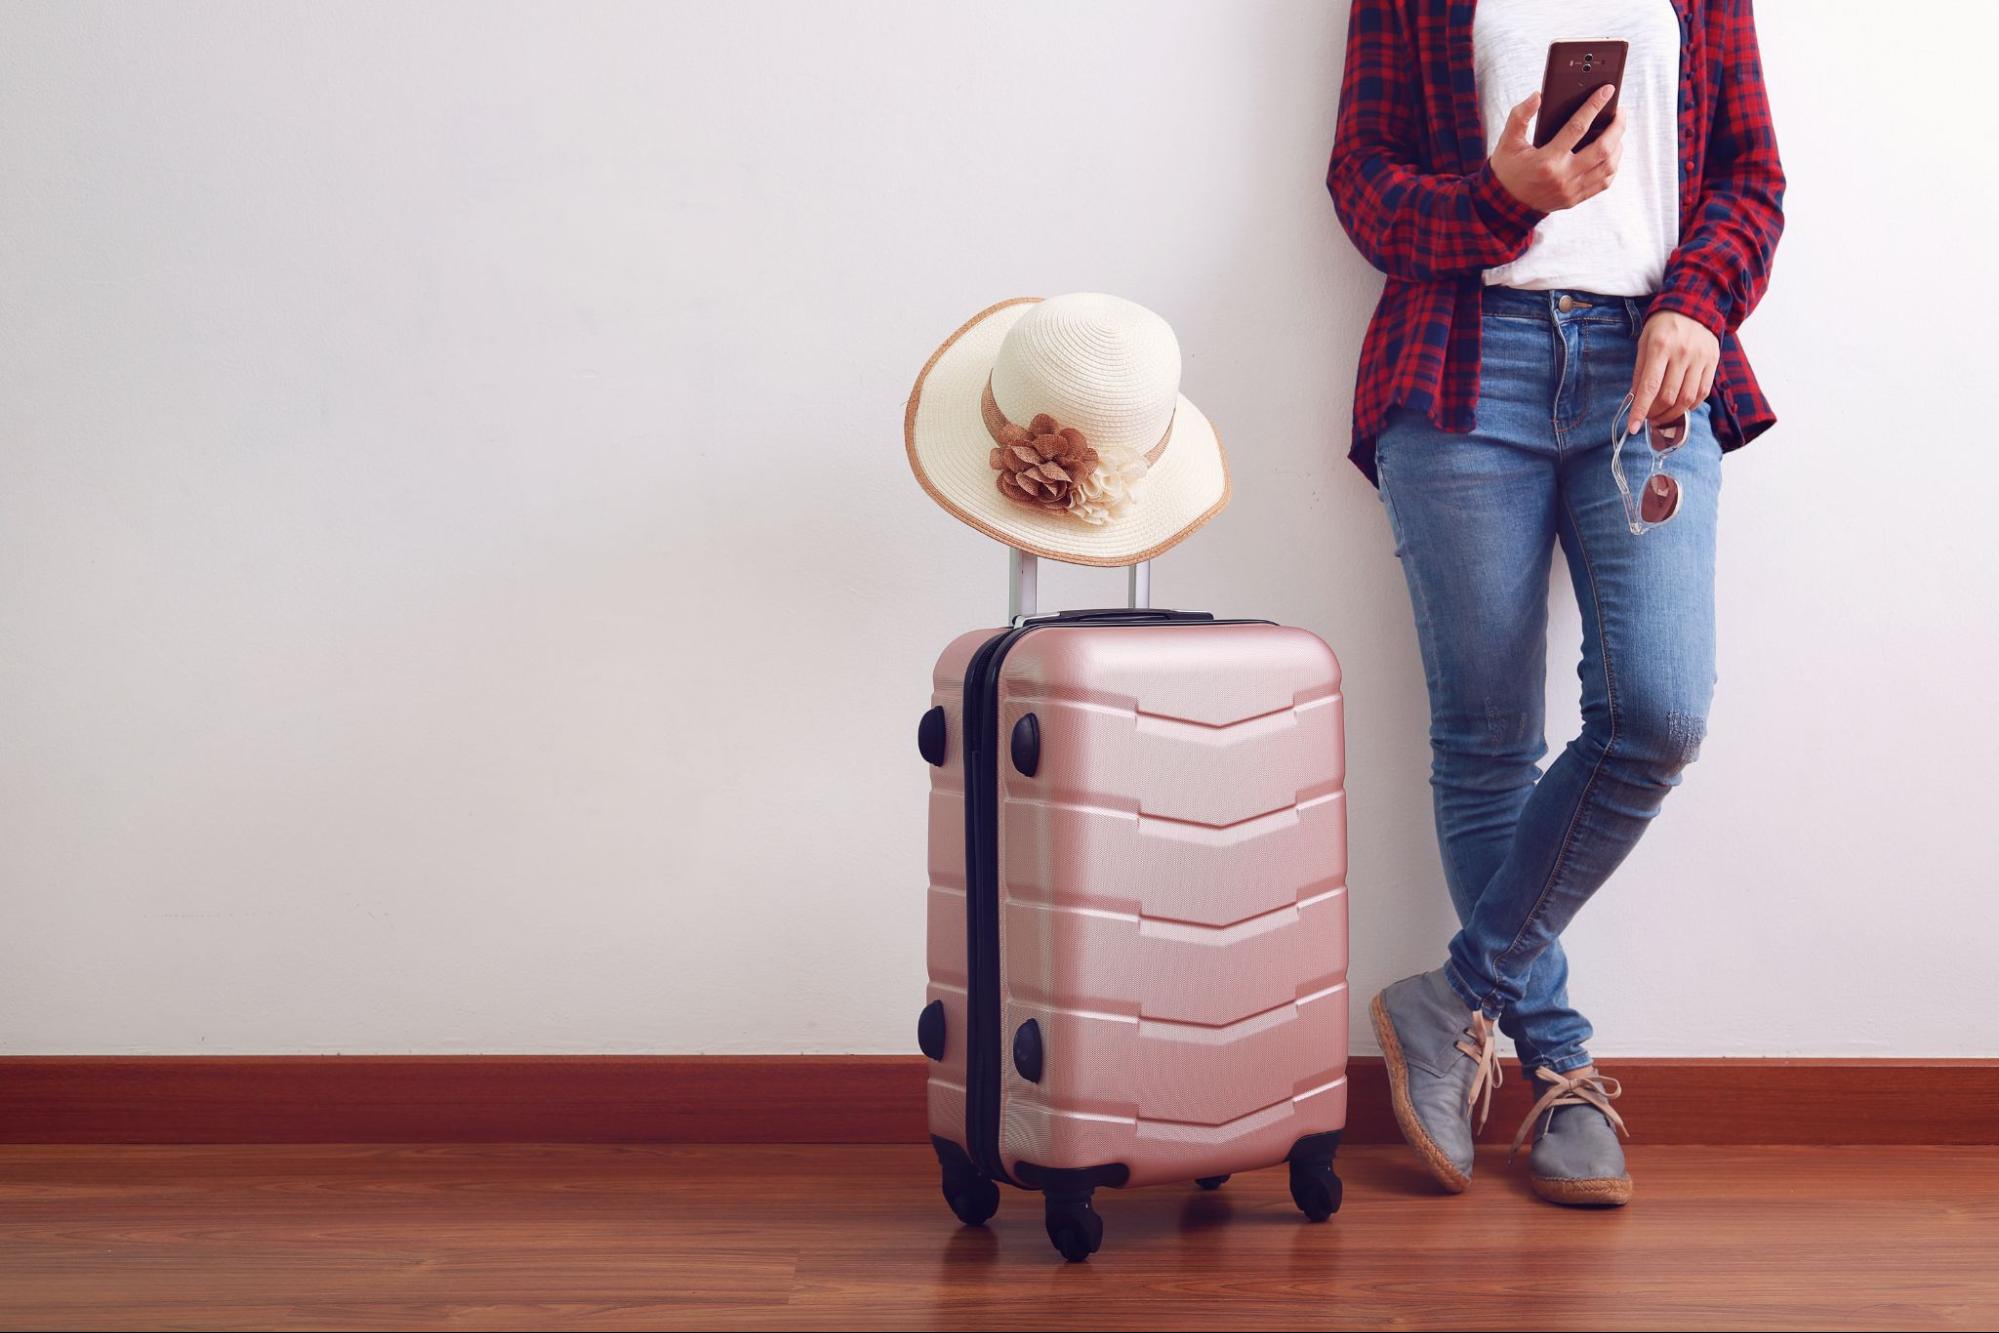 How Landing Can Help Property Managers Tap Into the Rise of Digital Nomads